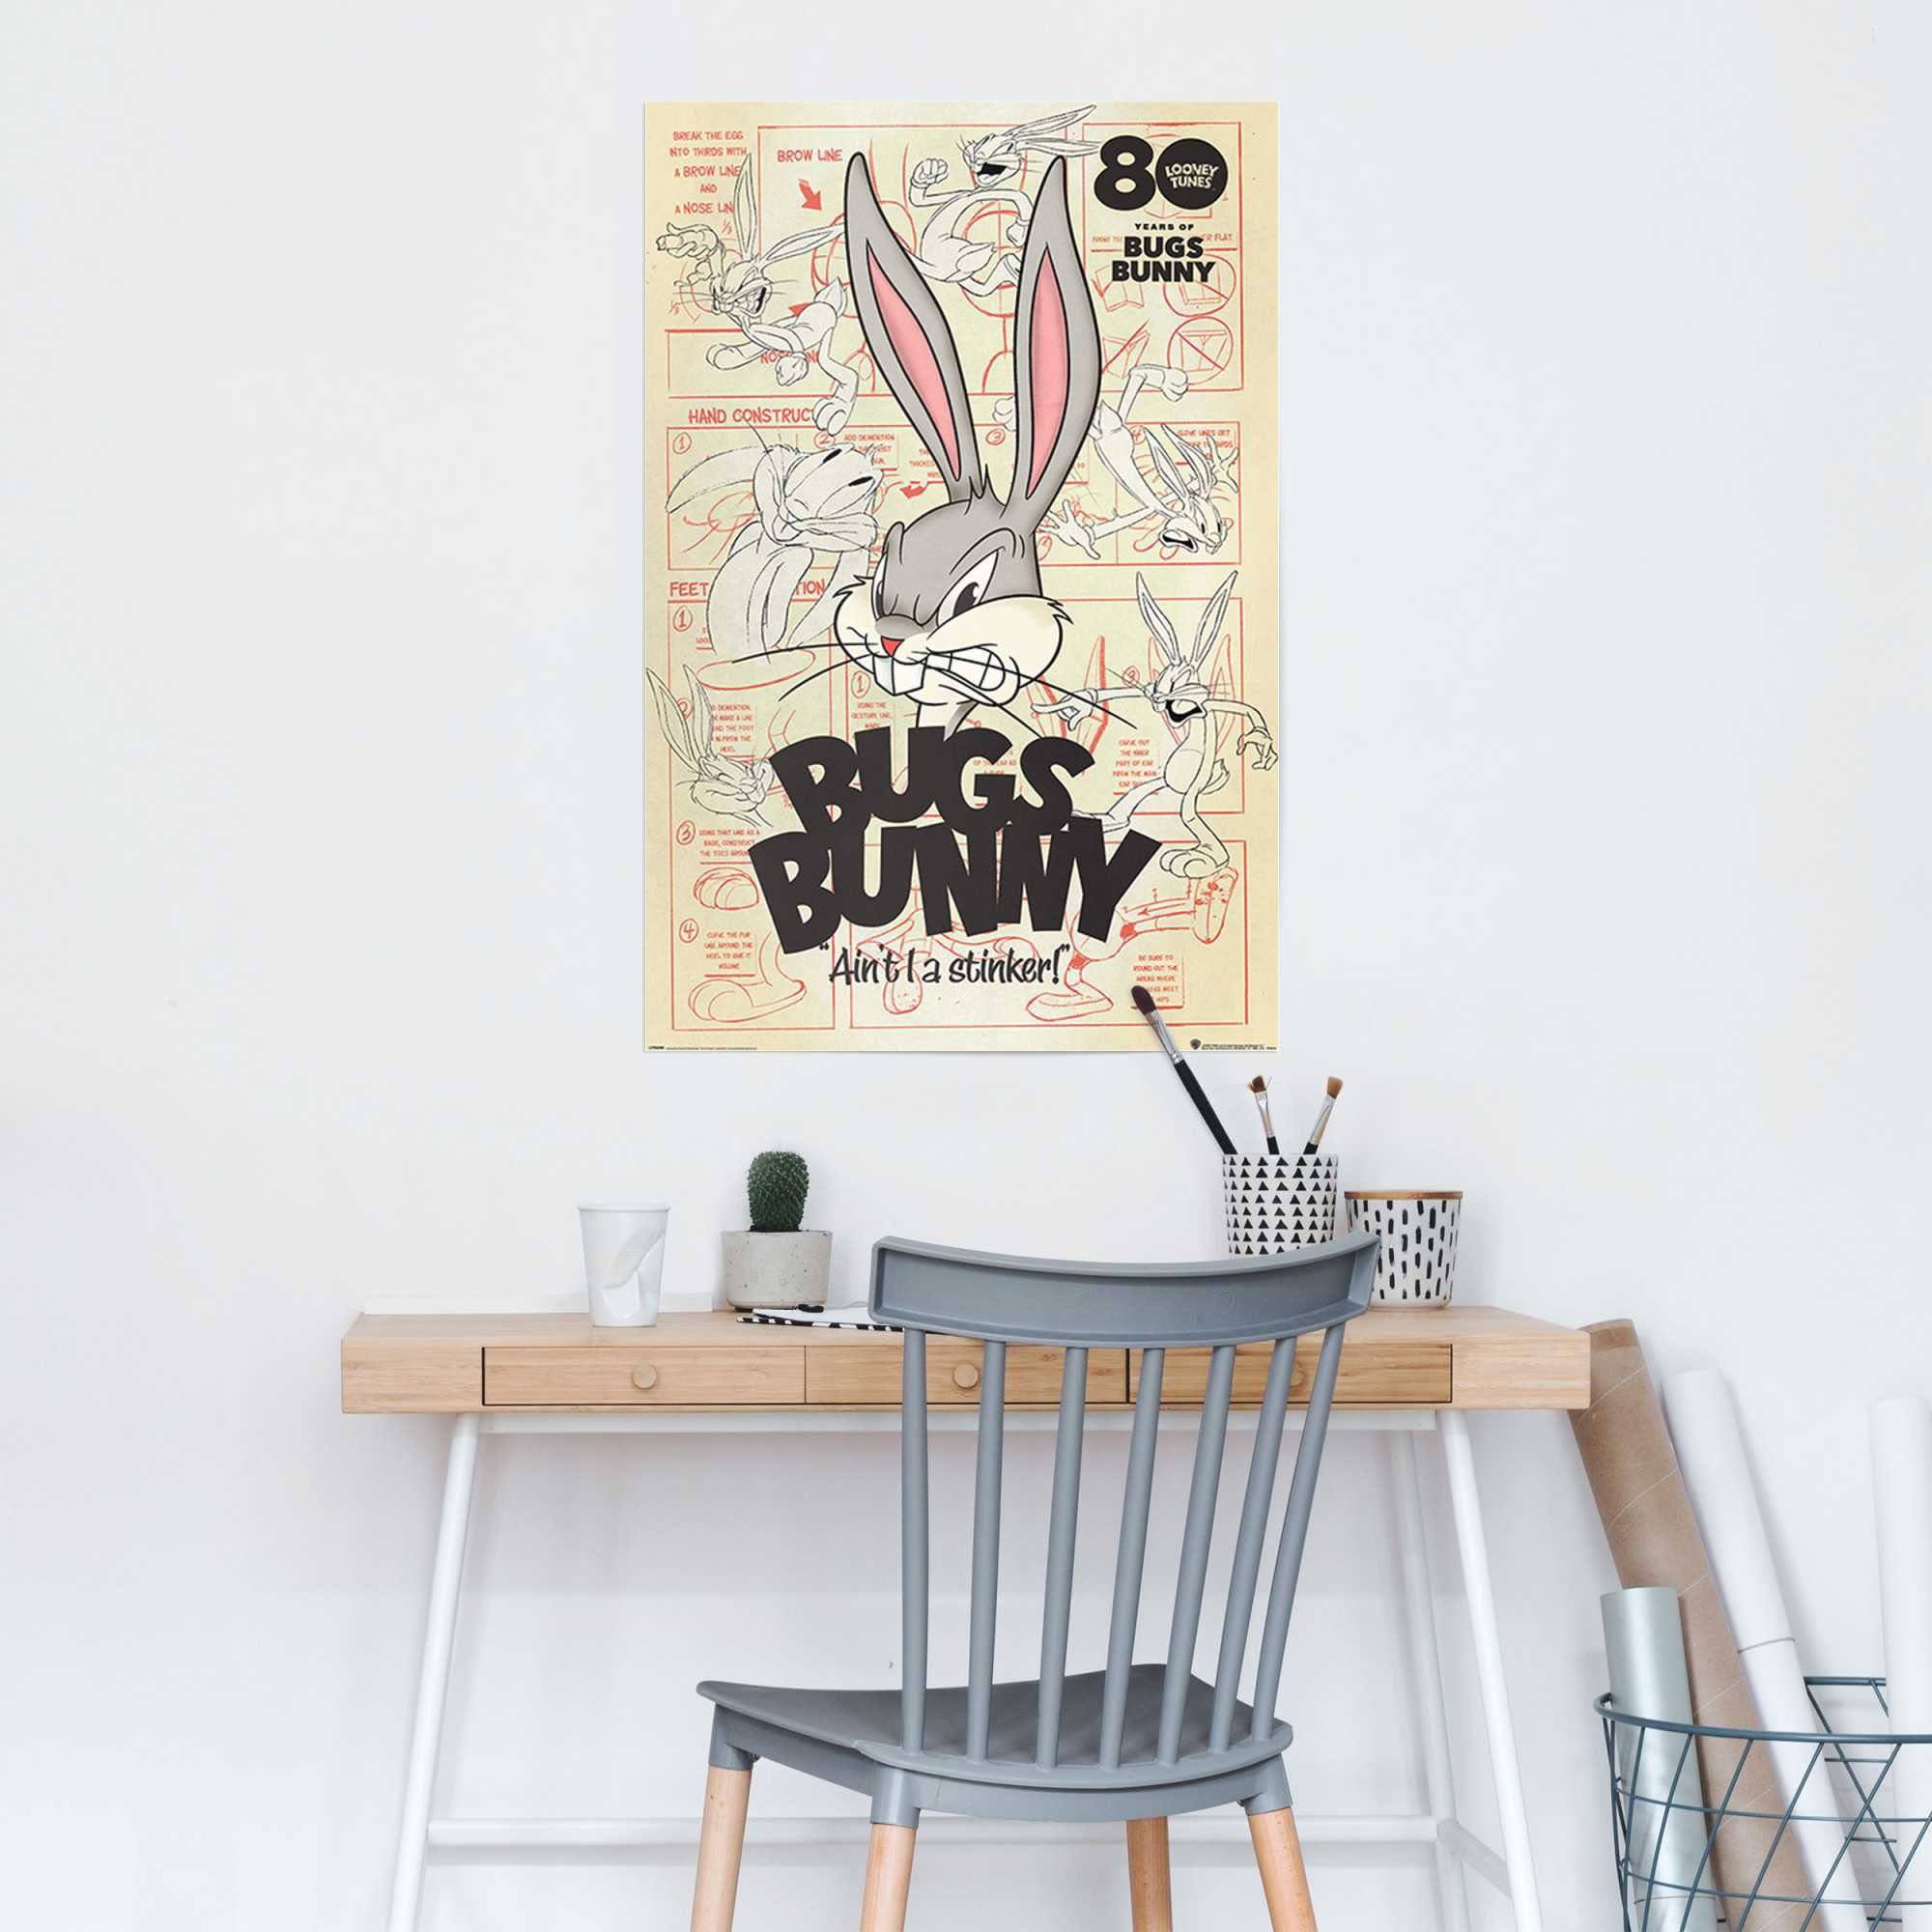 Reinders! I ait (1 St) Bunny Tunes stinker Warner Looney Hase, a Bros - Bugs - Poster